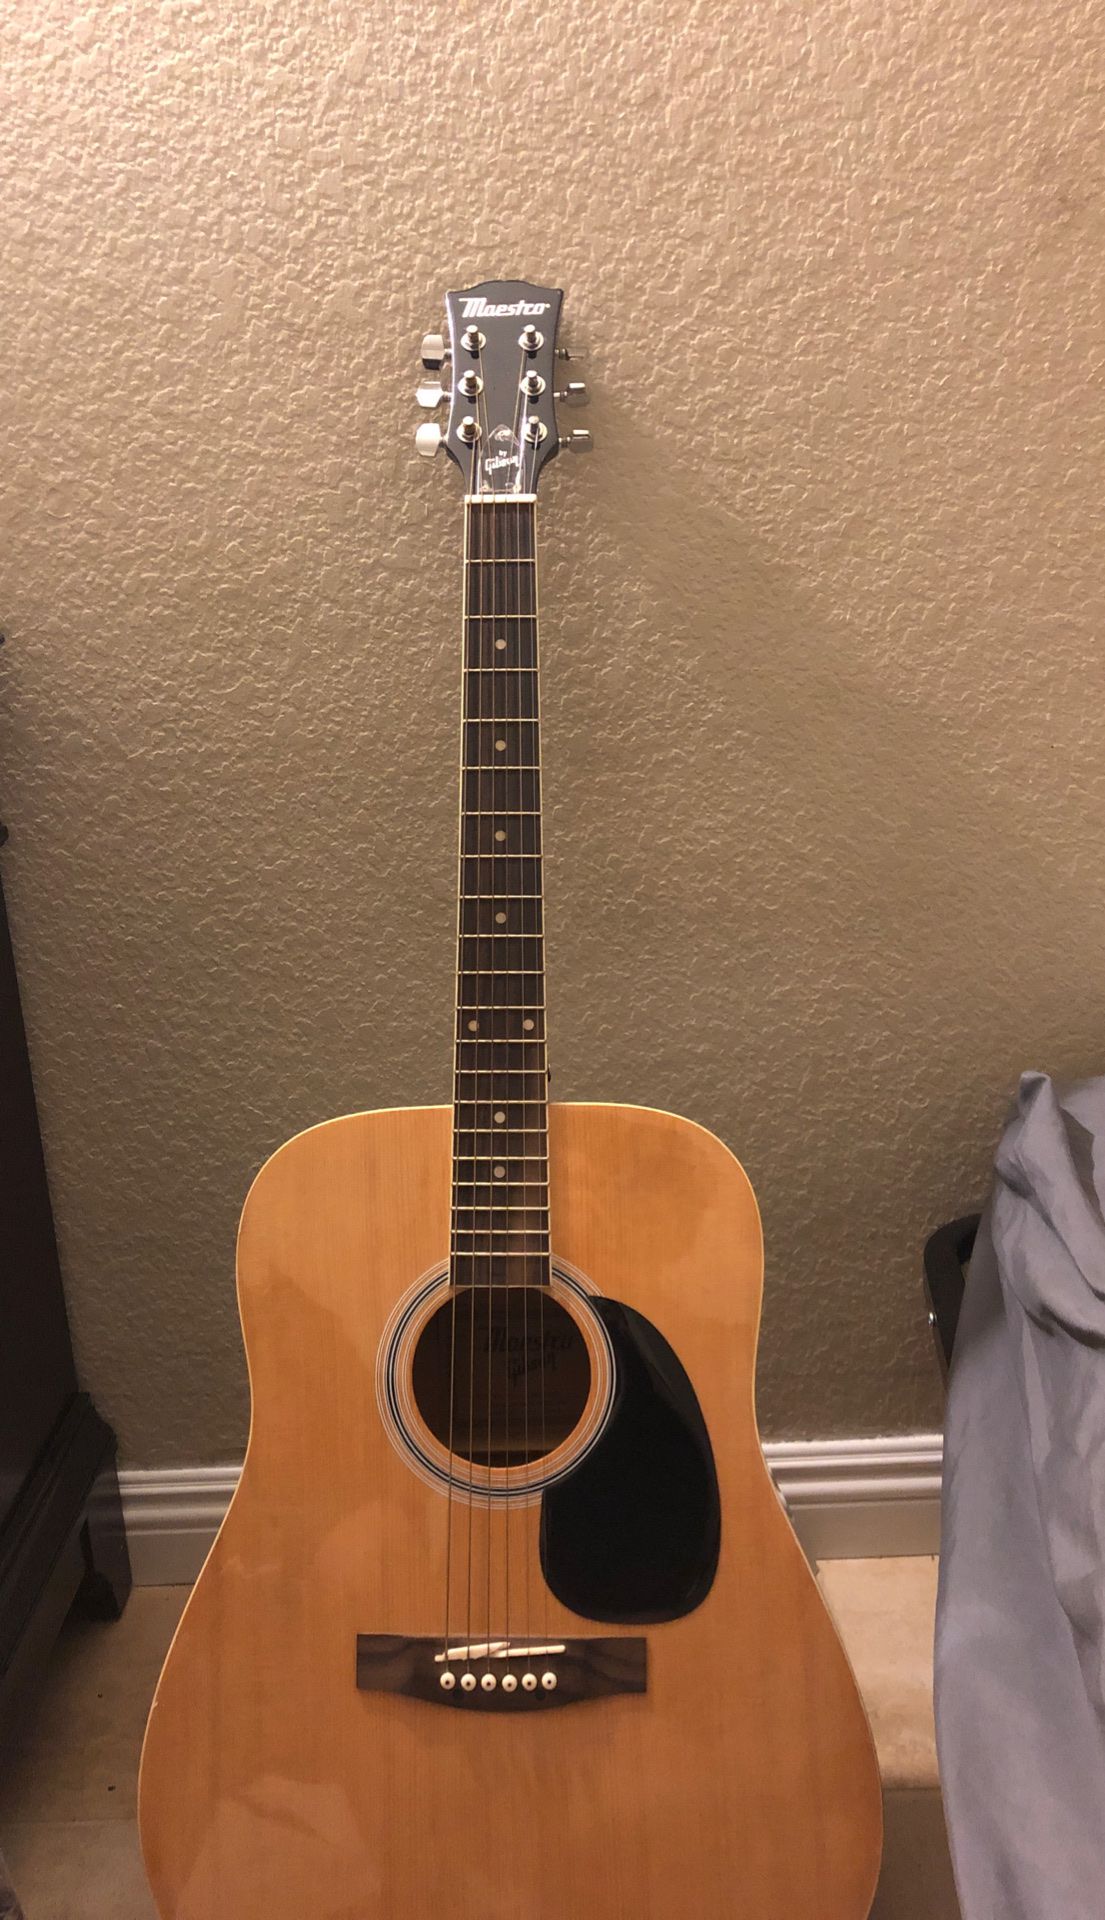 Maestro acoustic guitar with strings